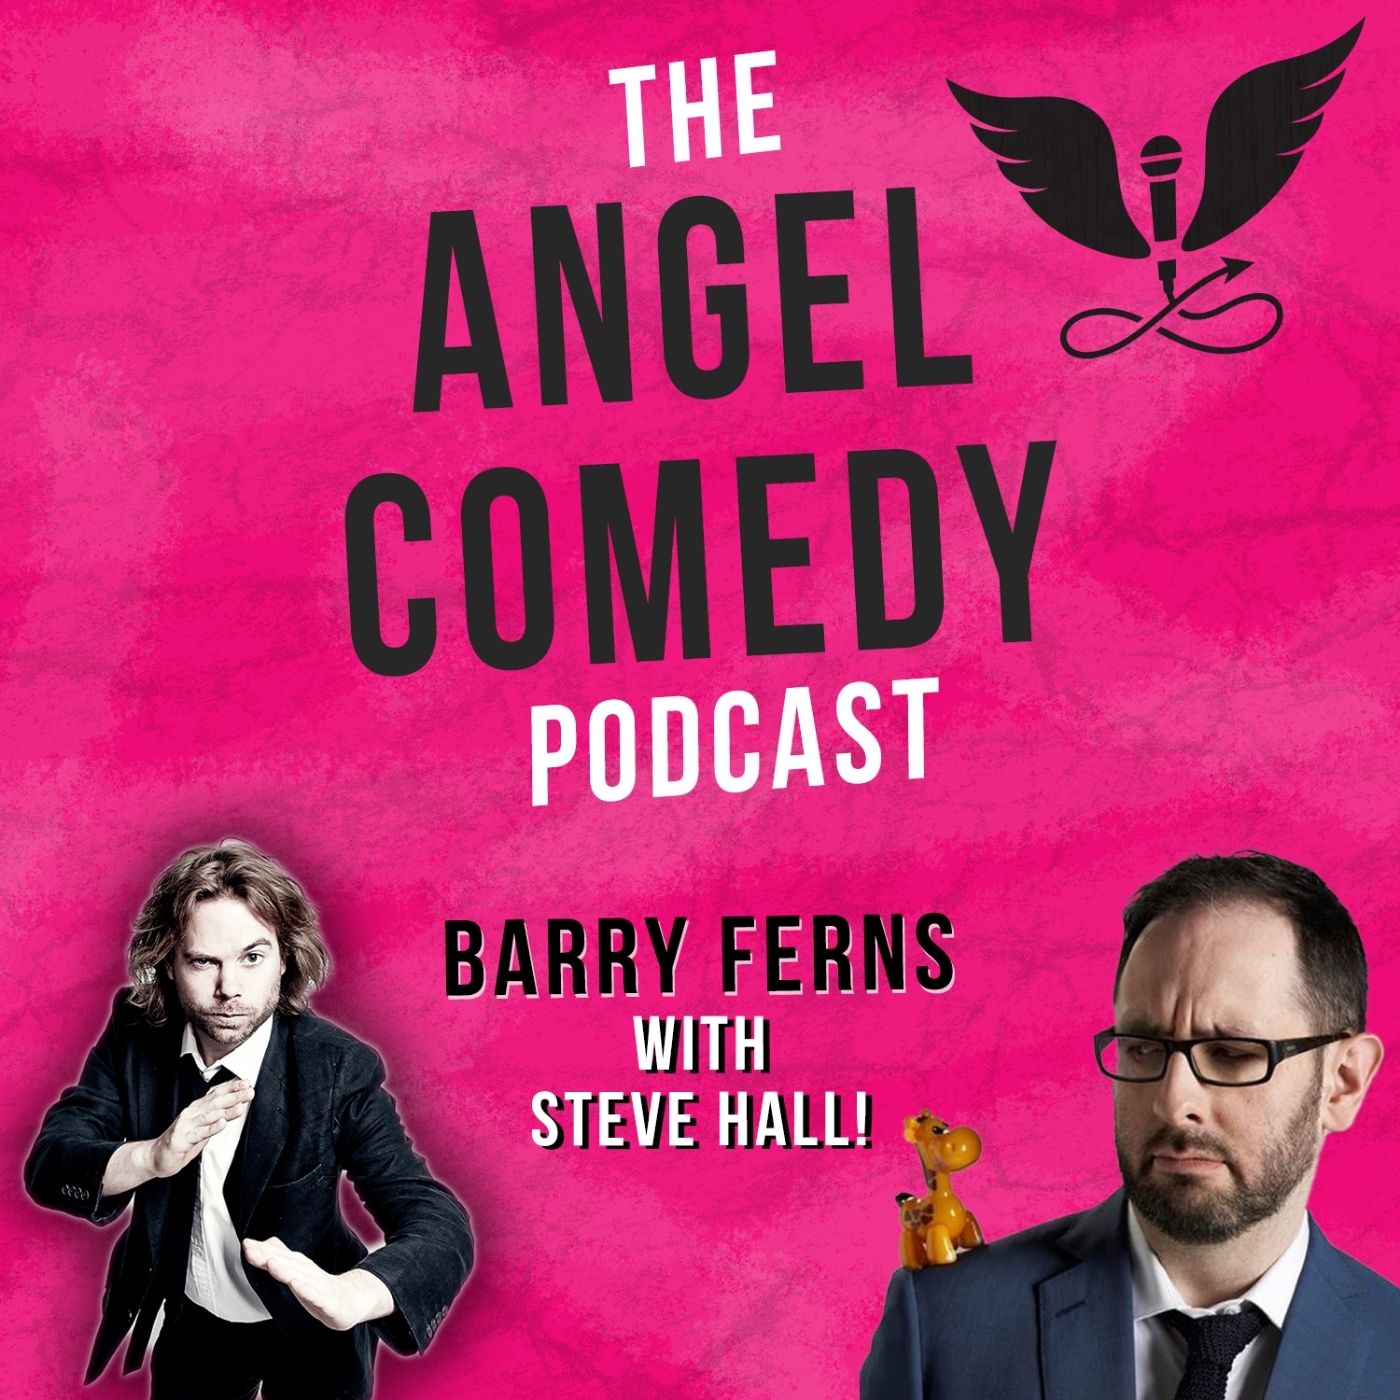 Podcast: The Angel Comedy Podcast with Steve Hall - Angel Comedy